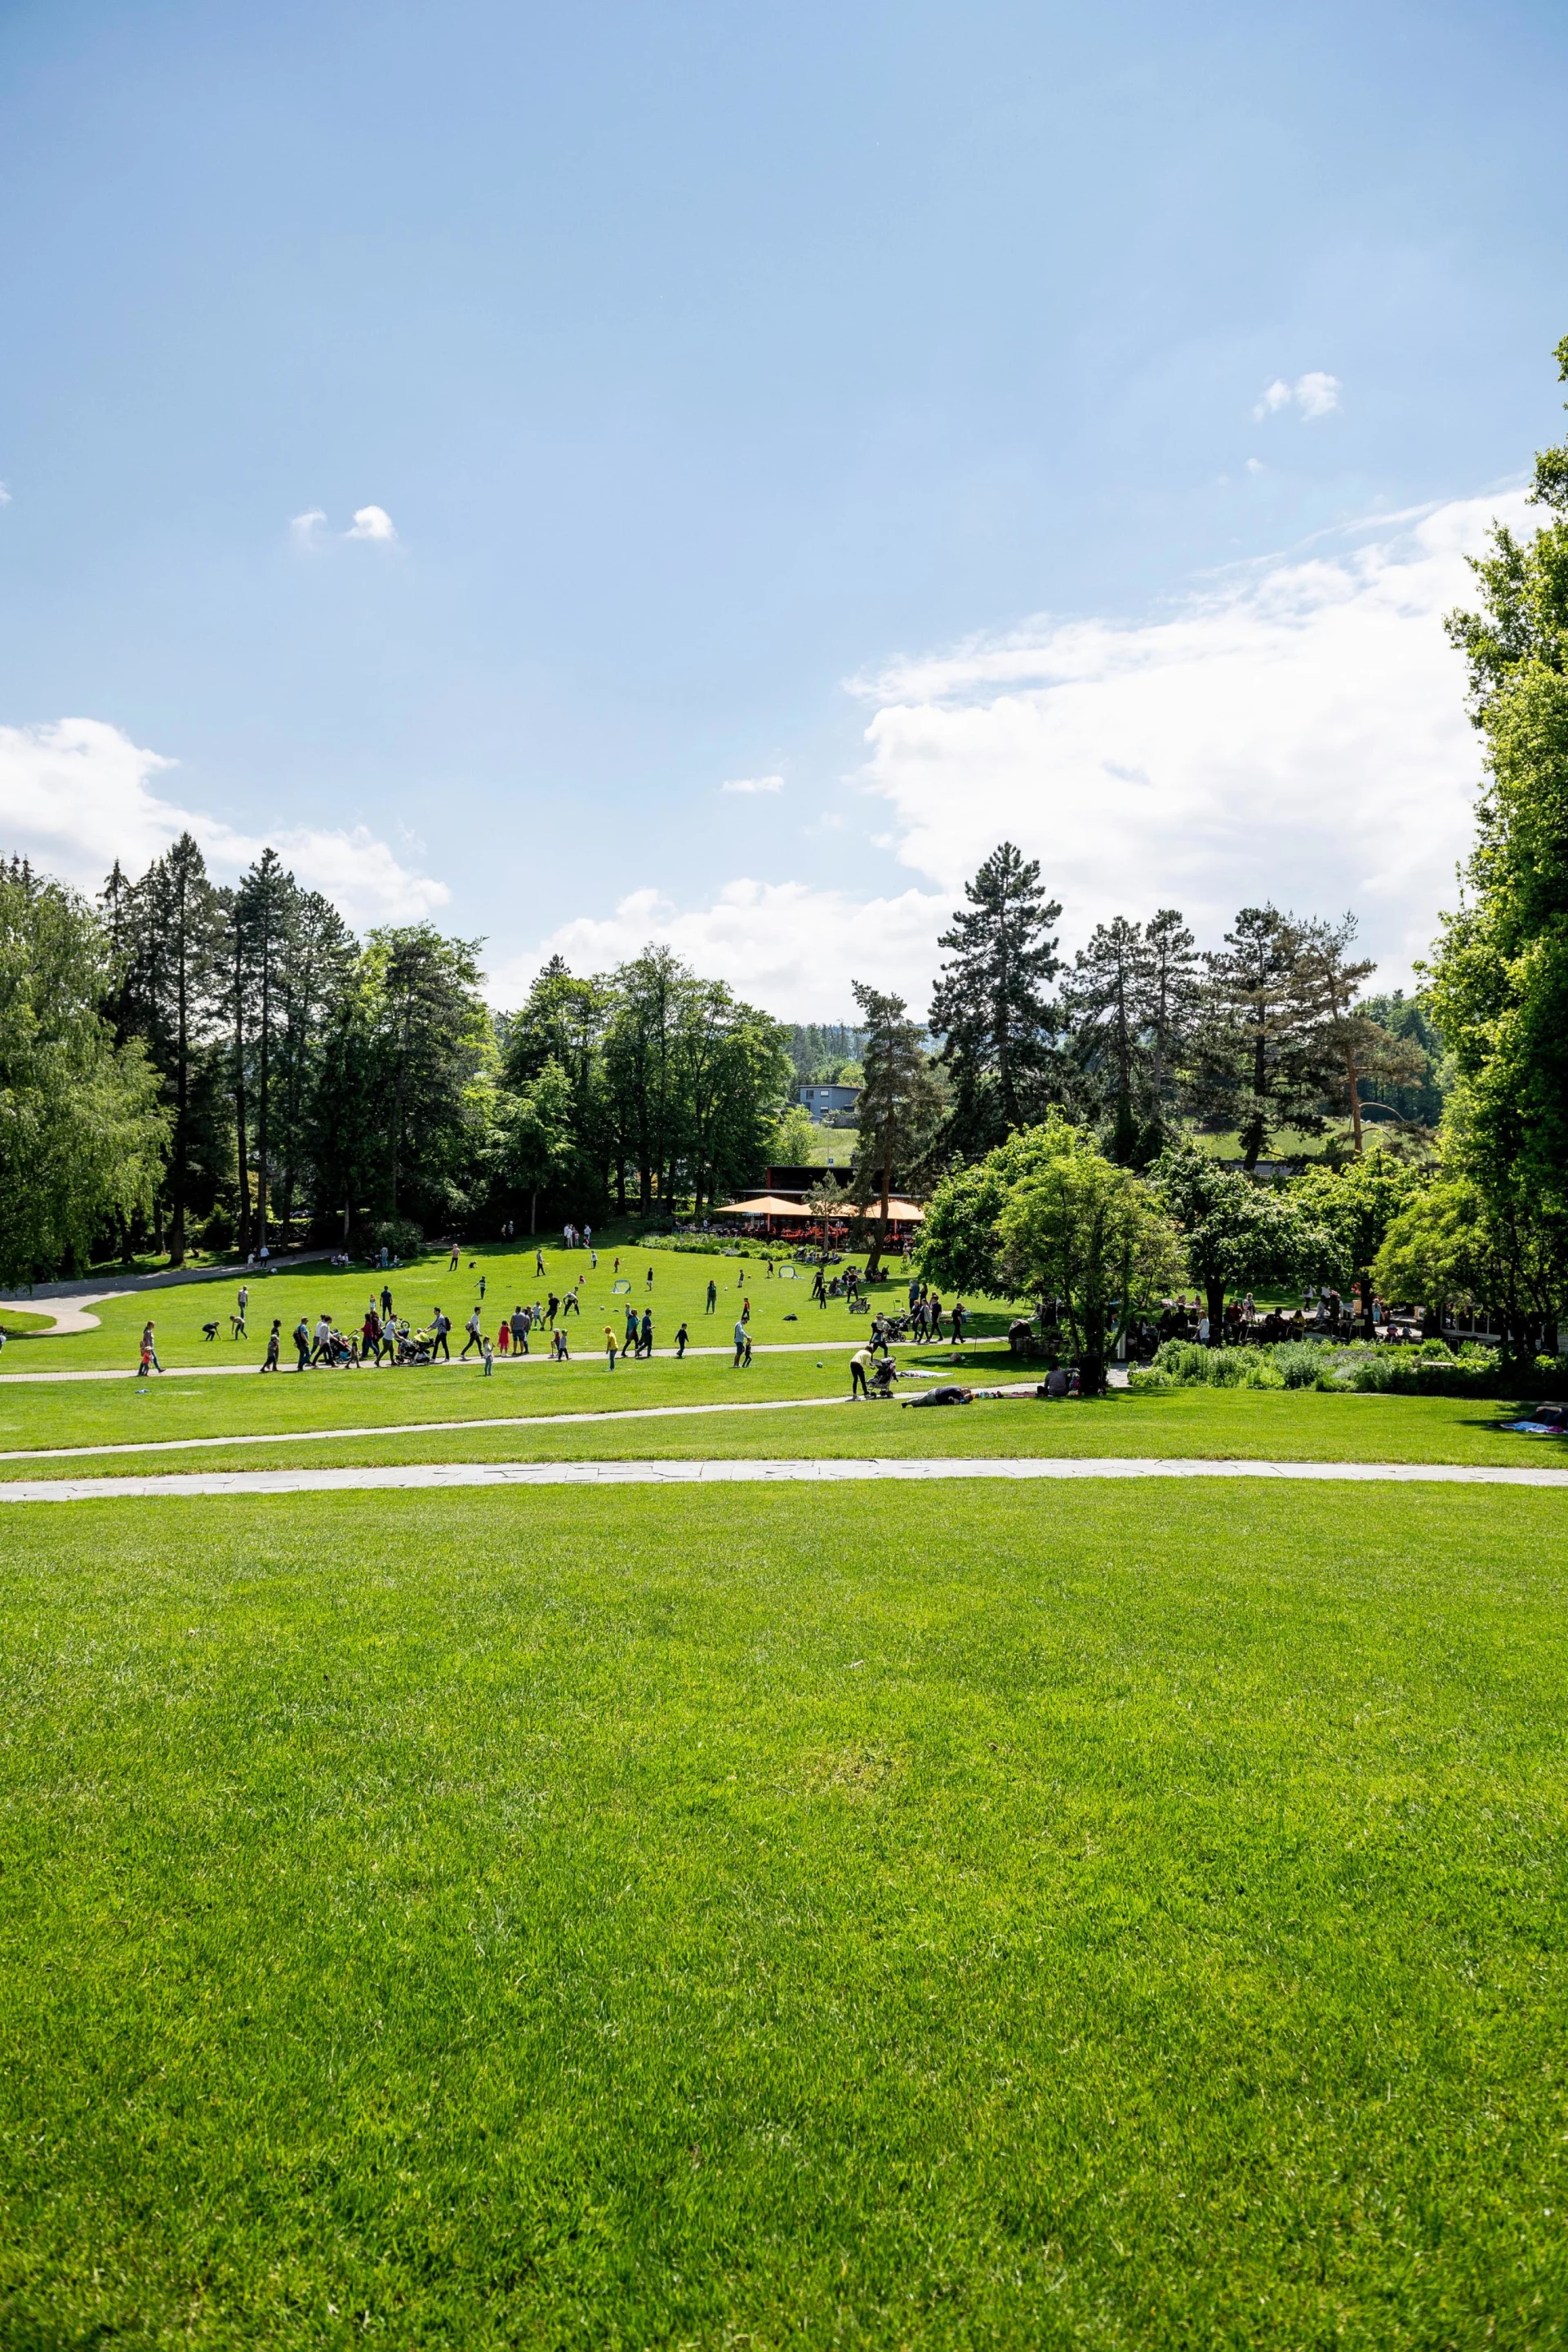 View over a park, a meadow in the foreground, trees in the background.